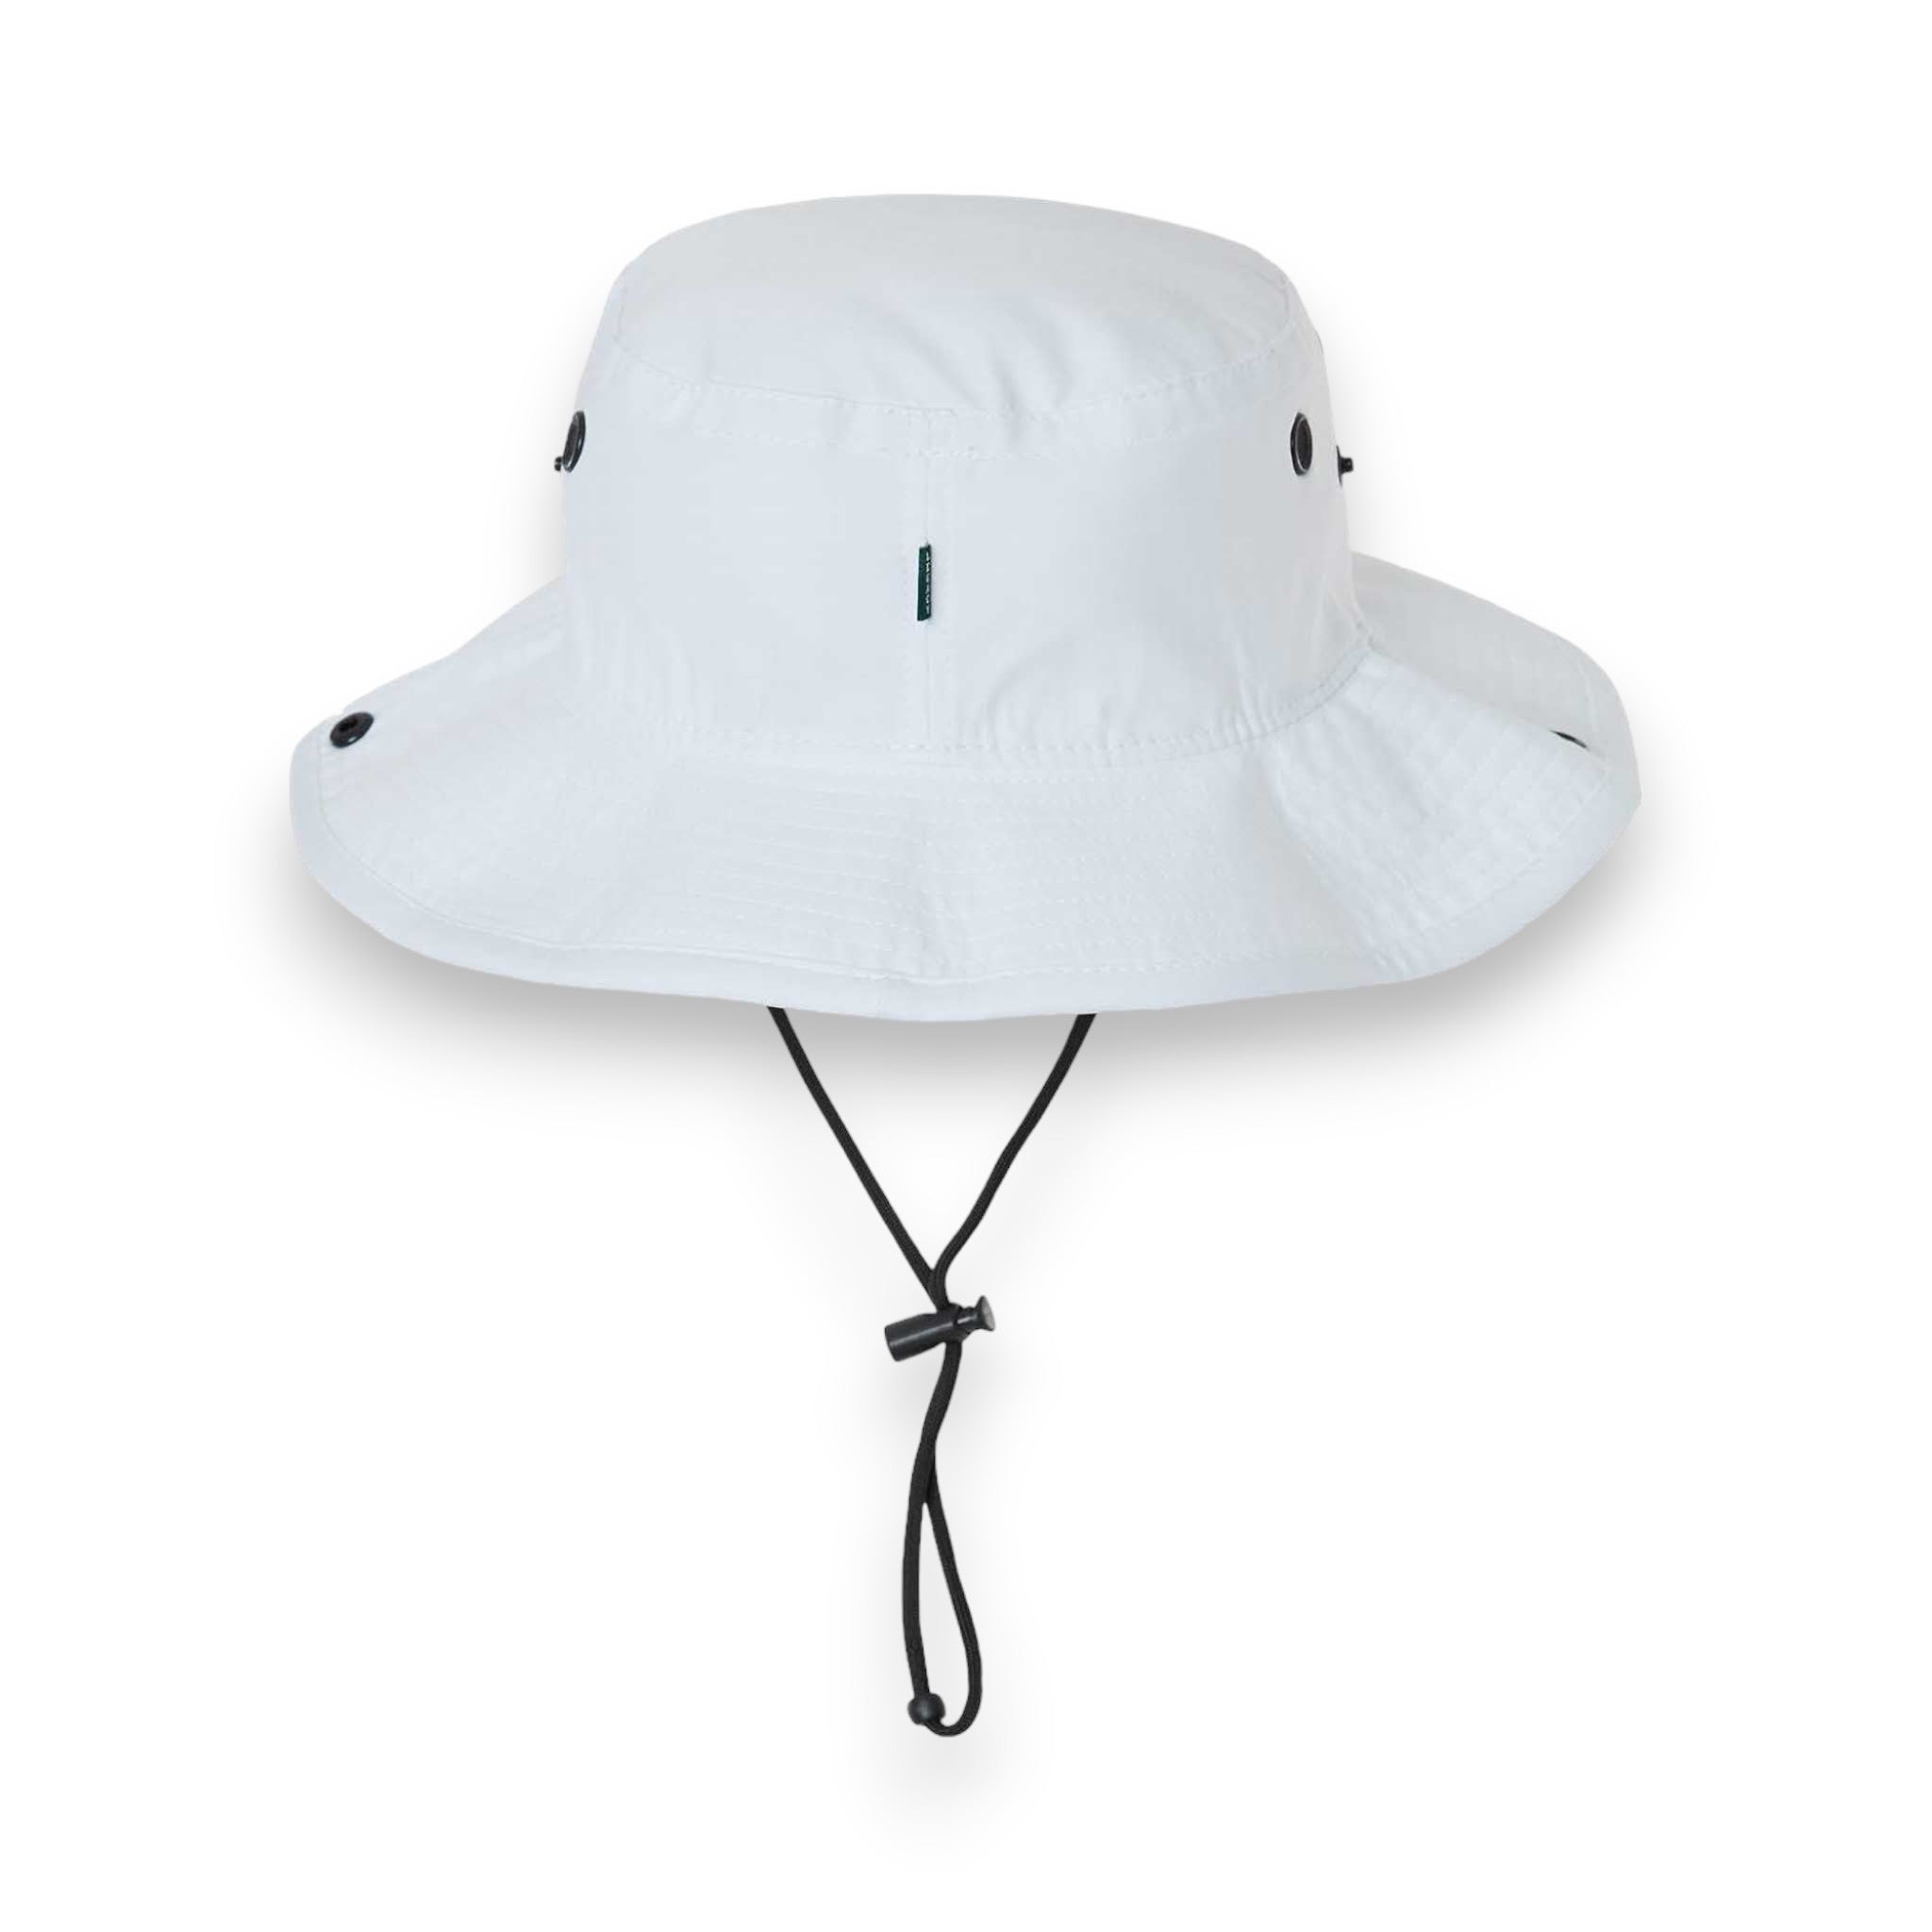 Back view of LEGACY CFB custom hat in white